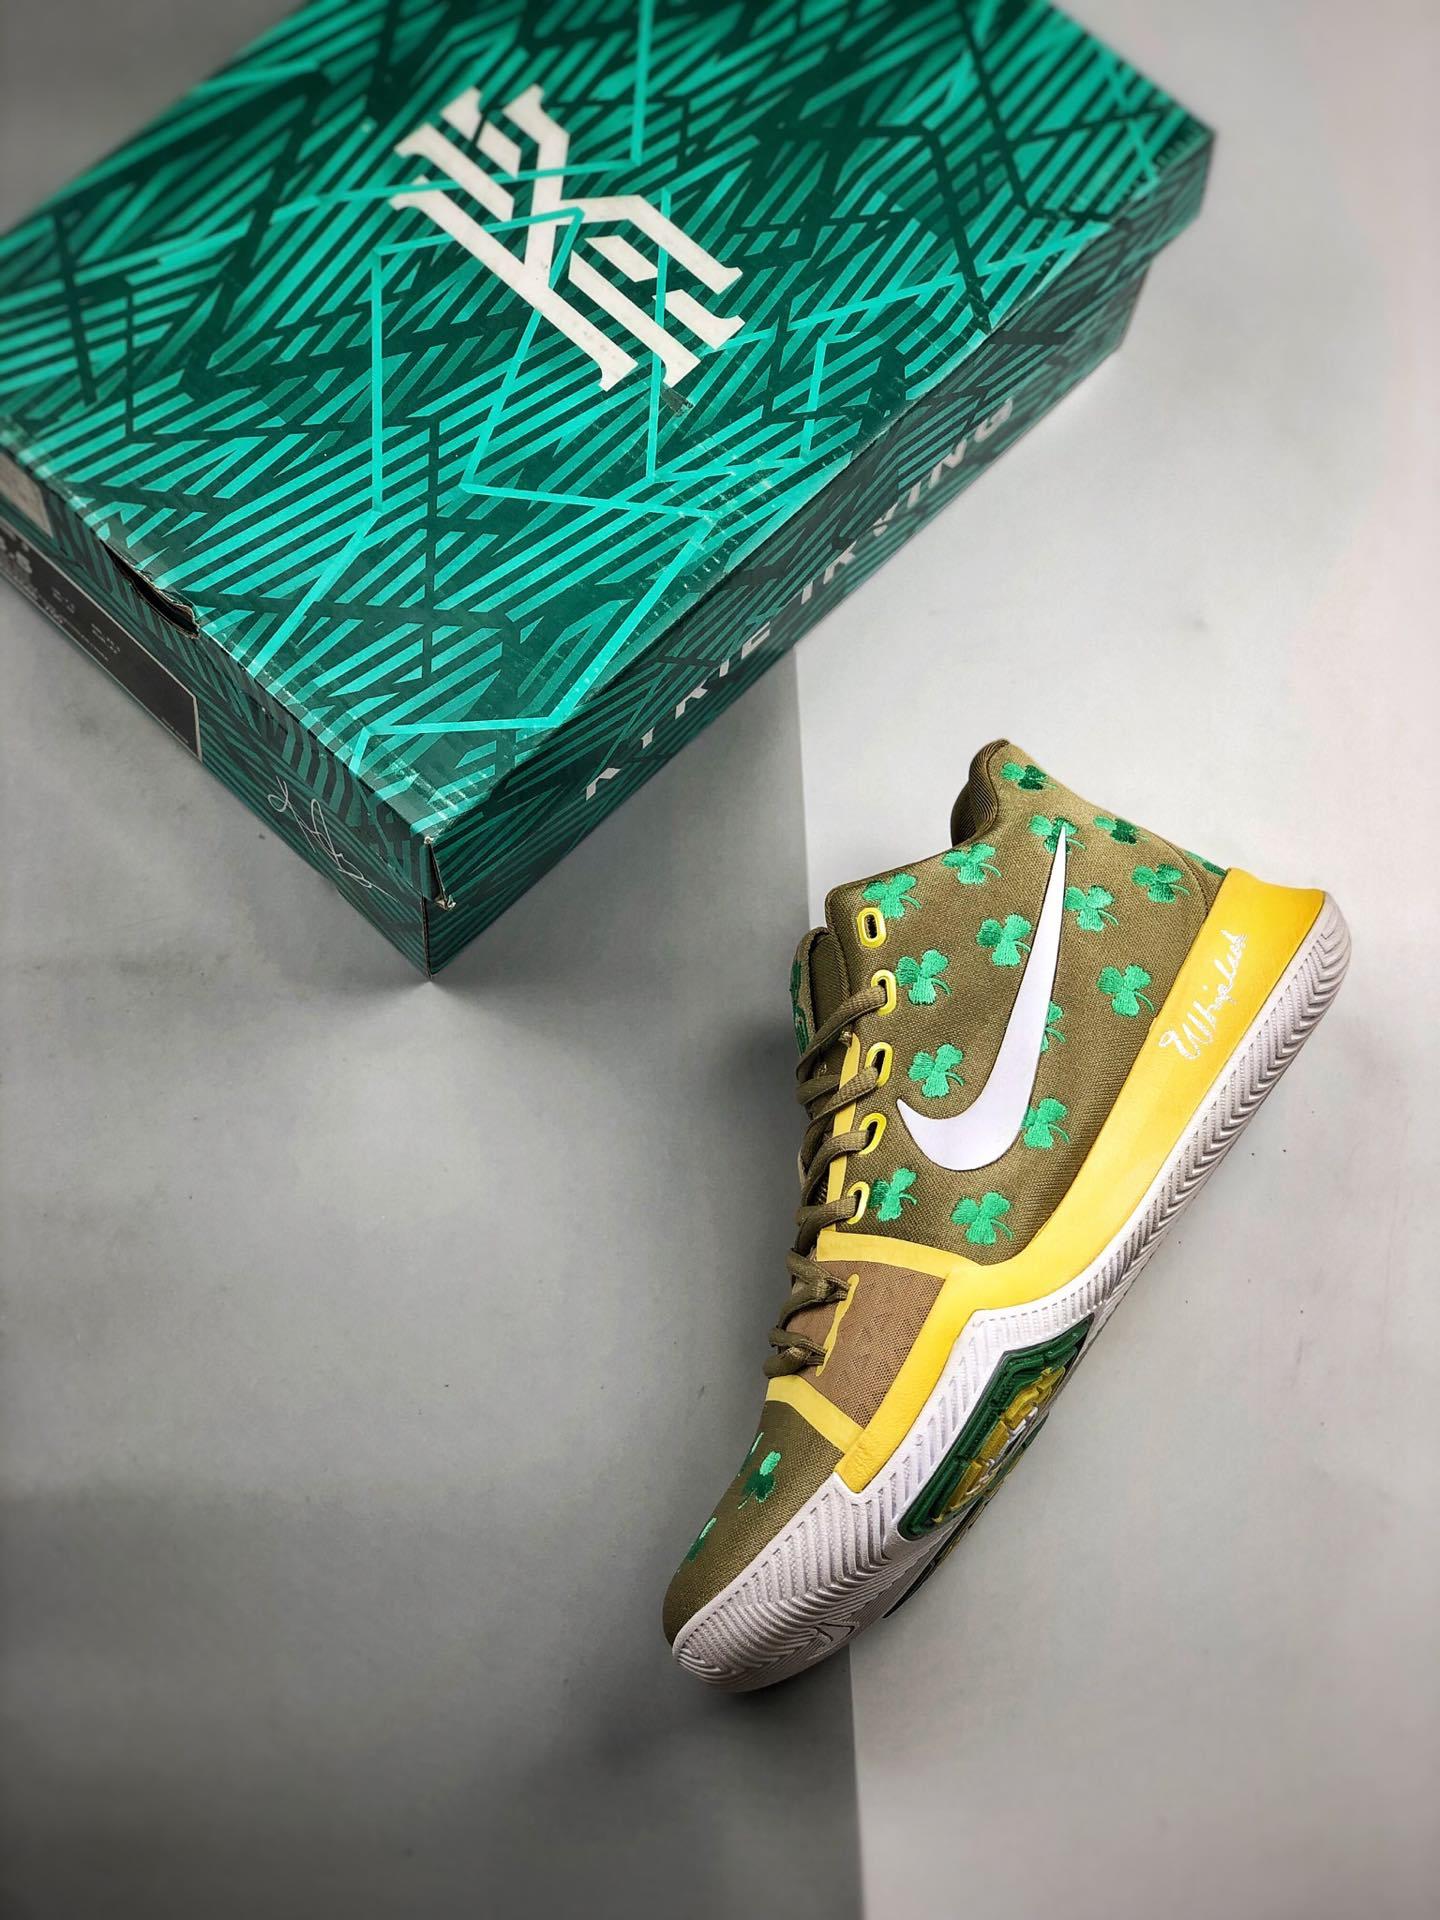 kyrie 3 luck for sale